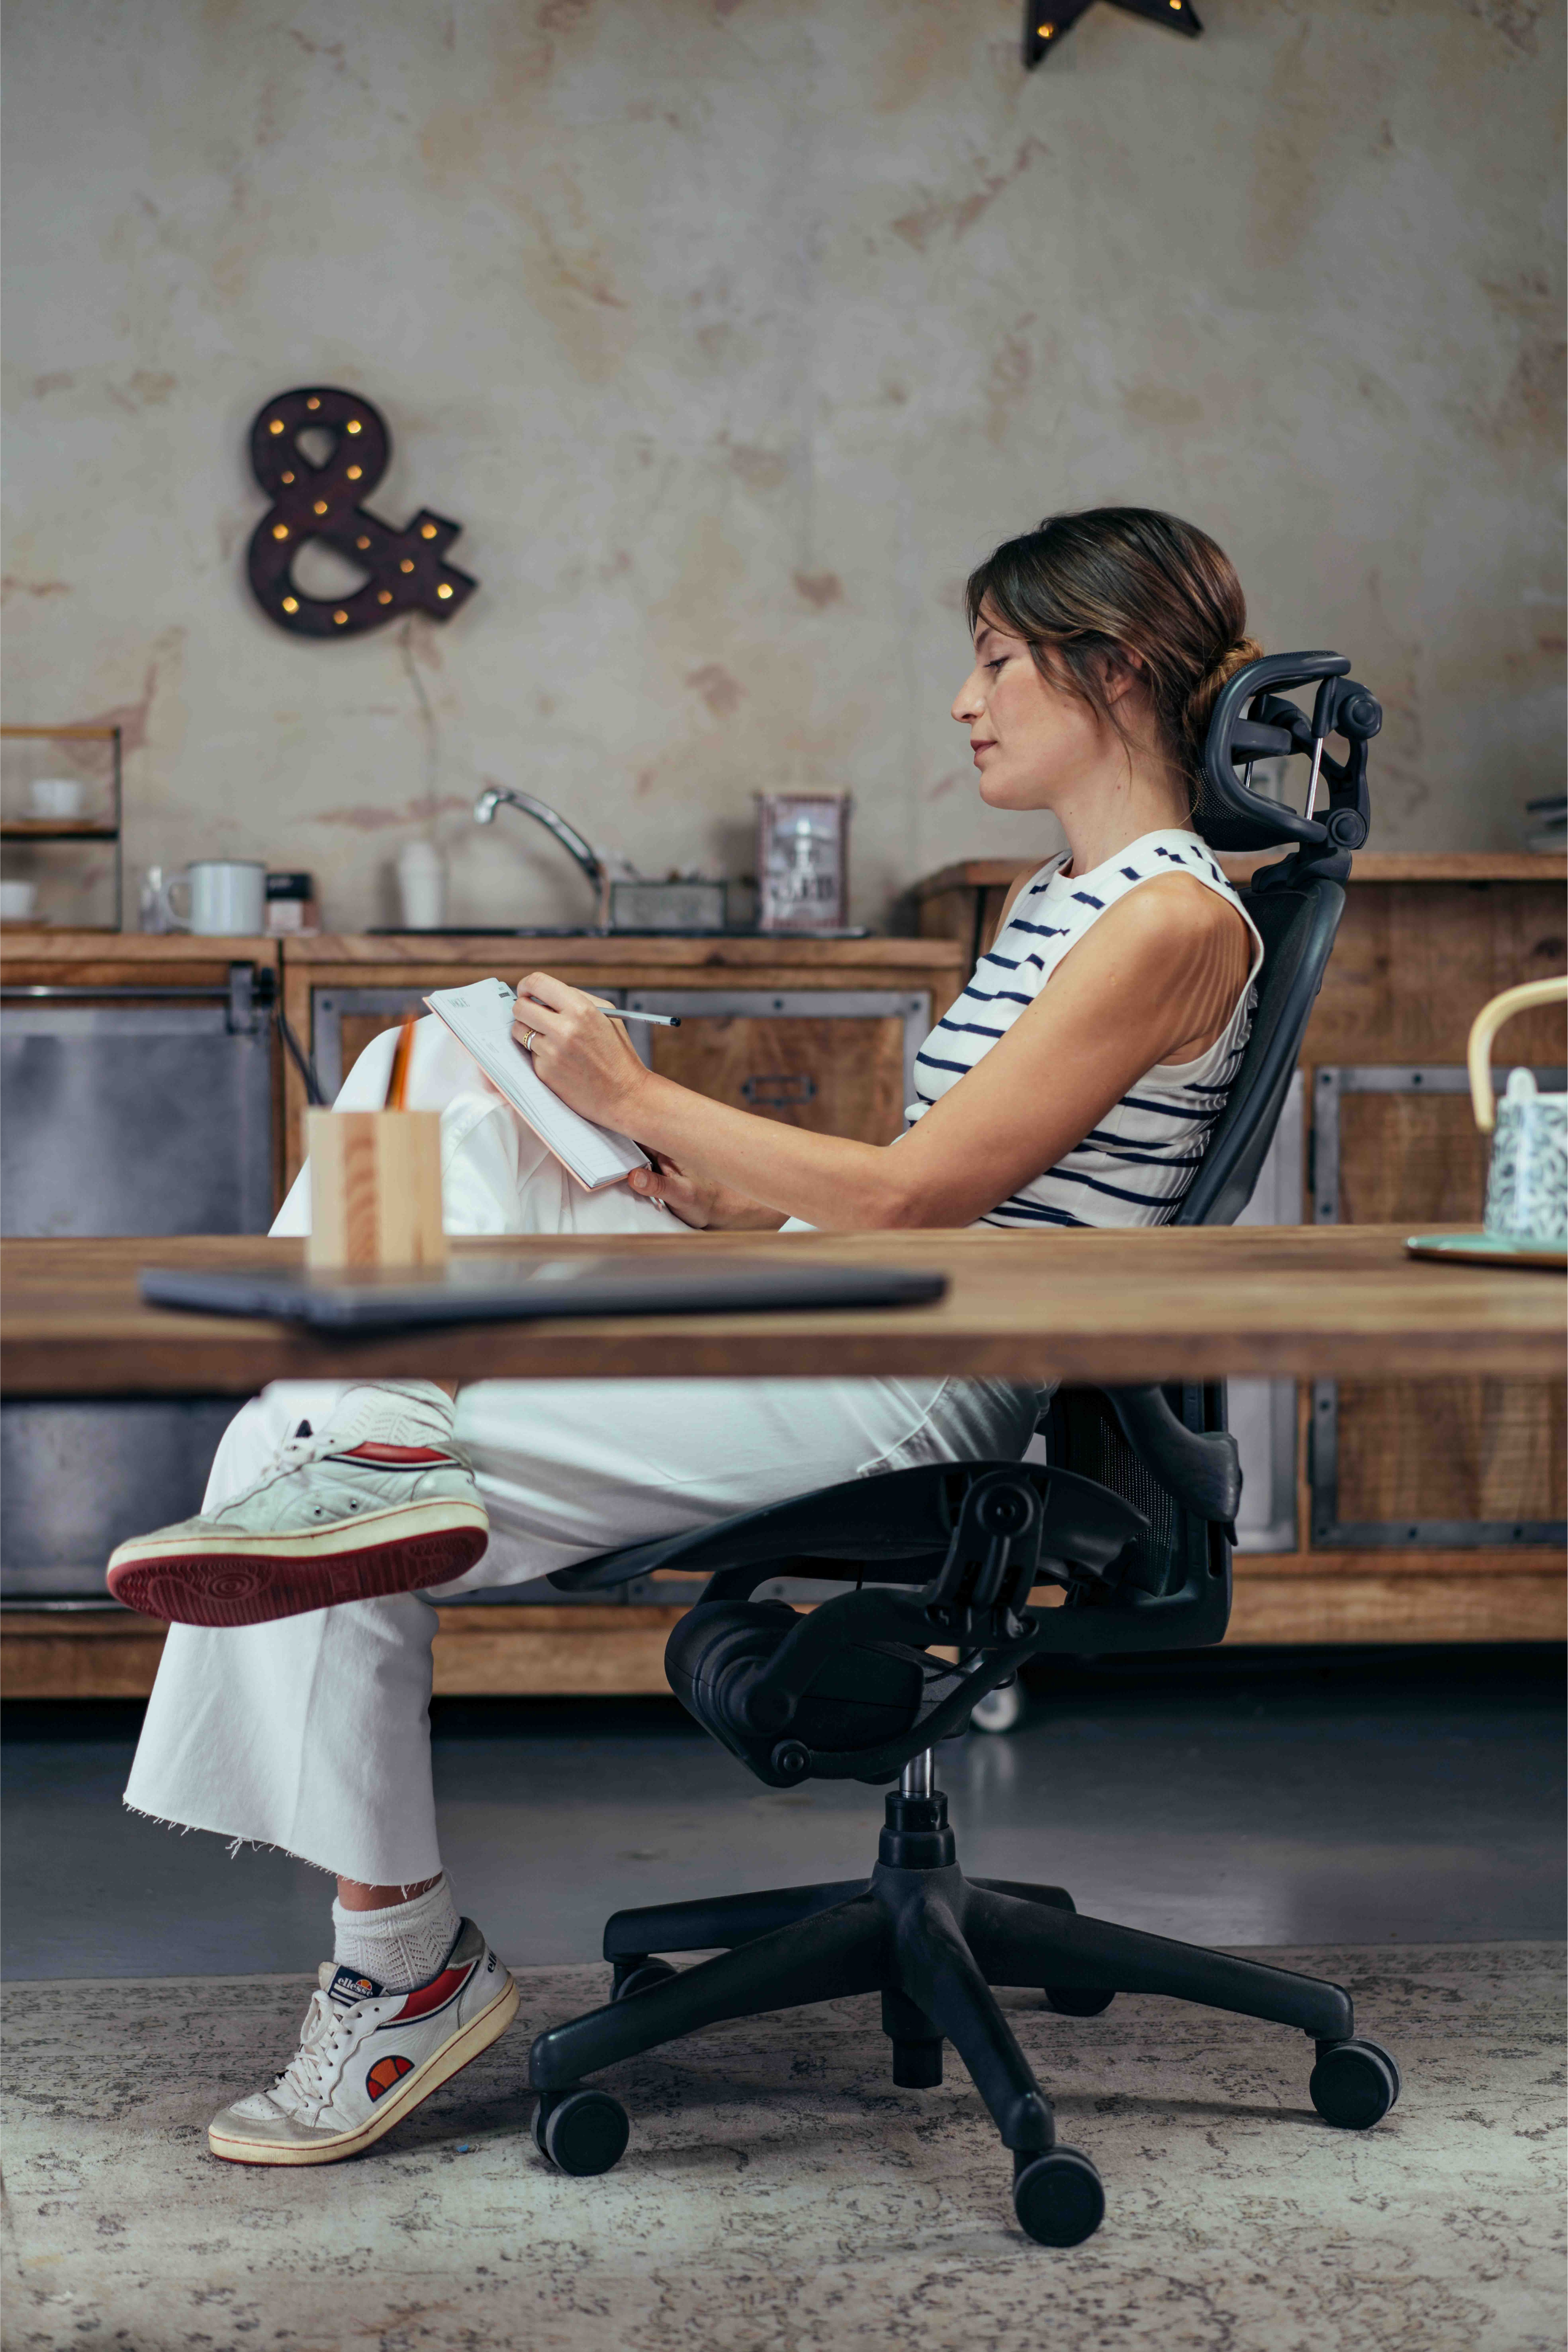 Herman Miller Launches New Aeron® Chair